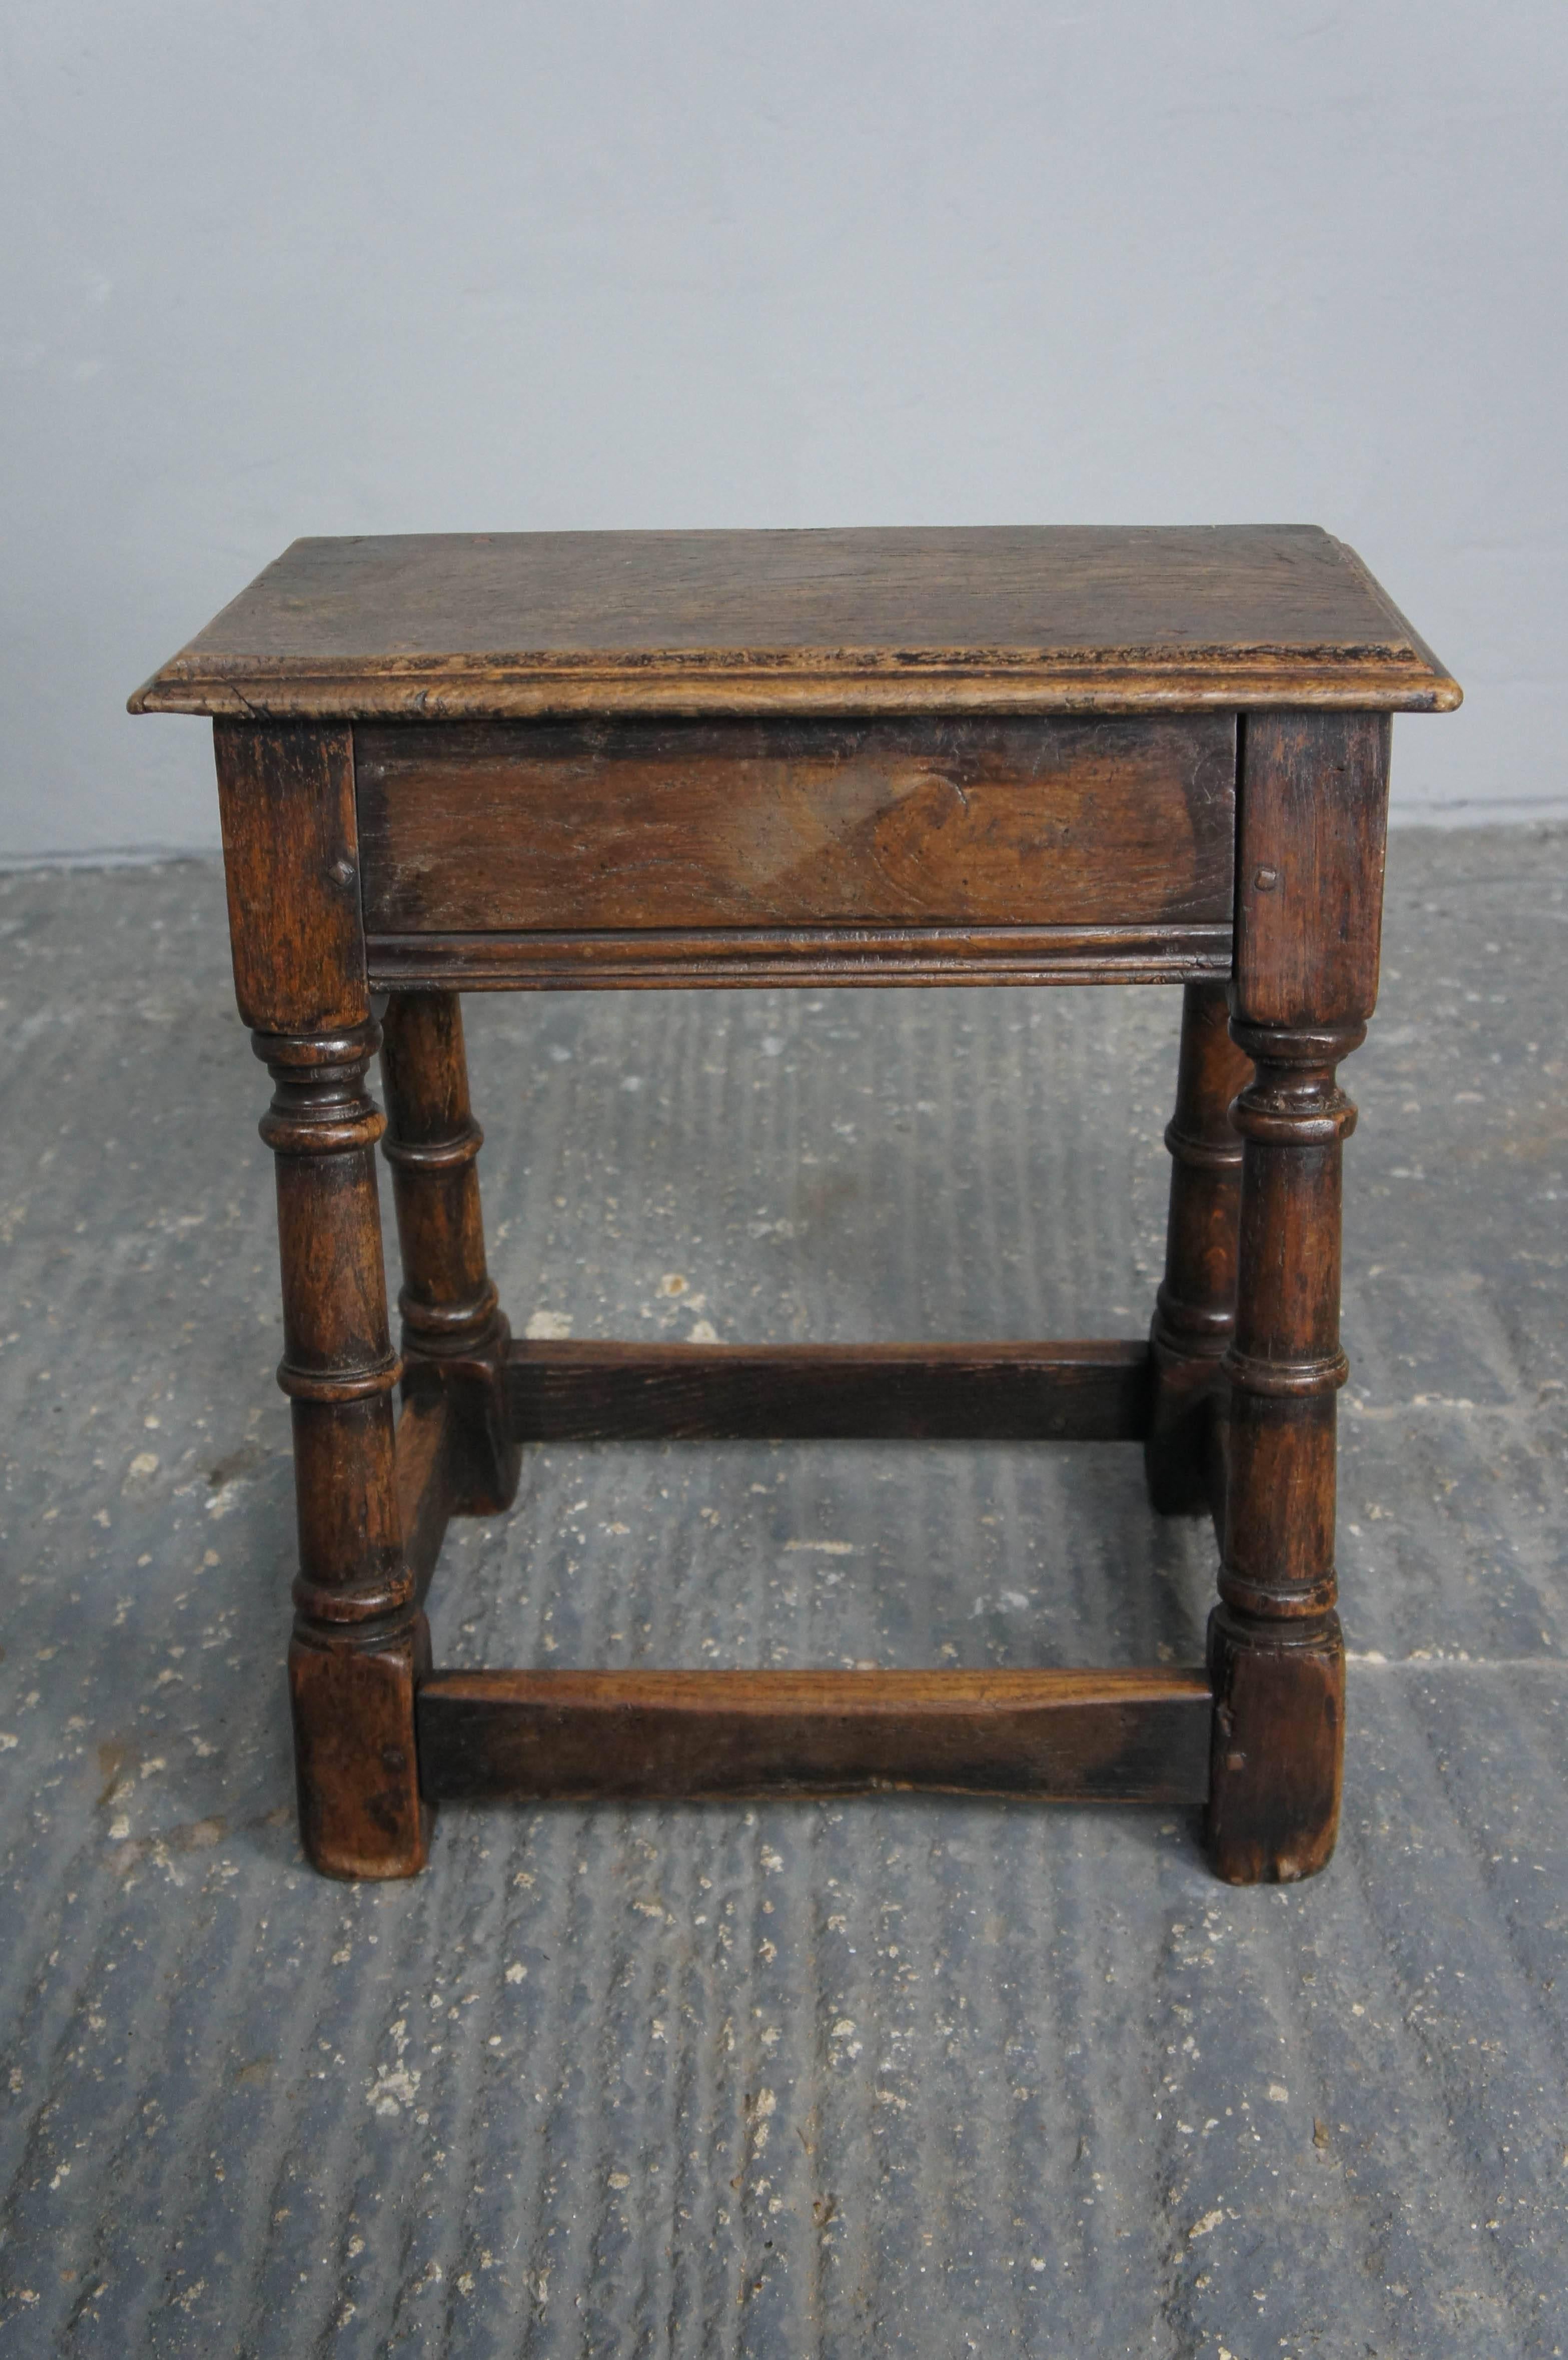 Excellent example of an English oak joint stool originating from the 1820s. Beautiful colour and patina, turned legs and pegged joints.